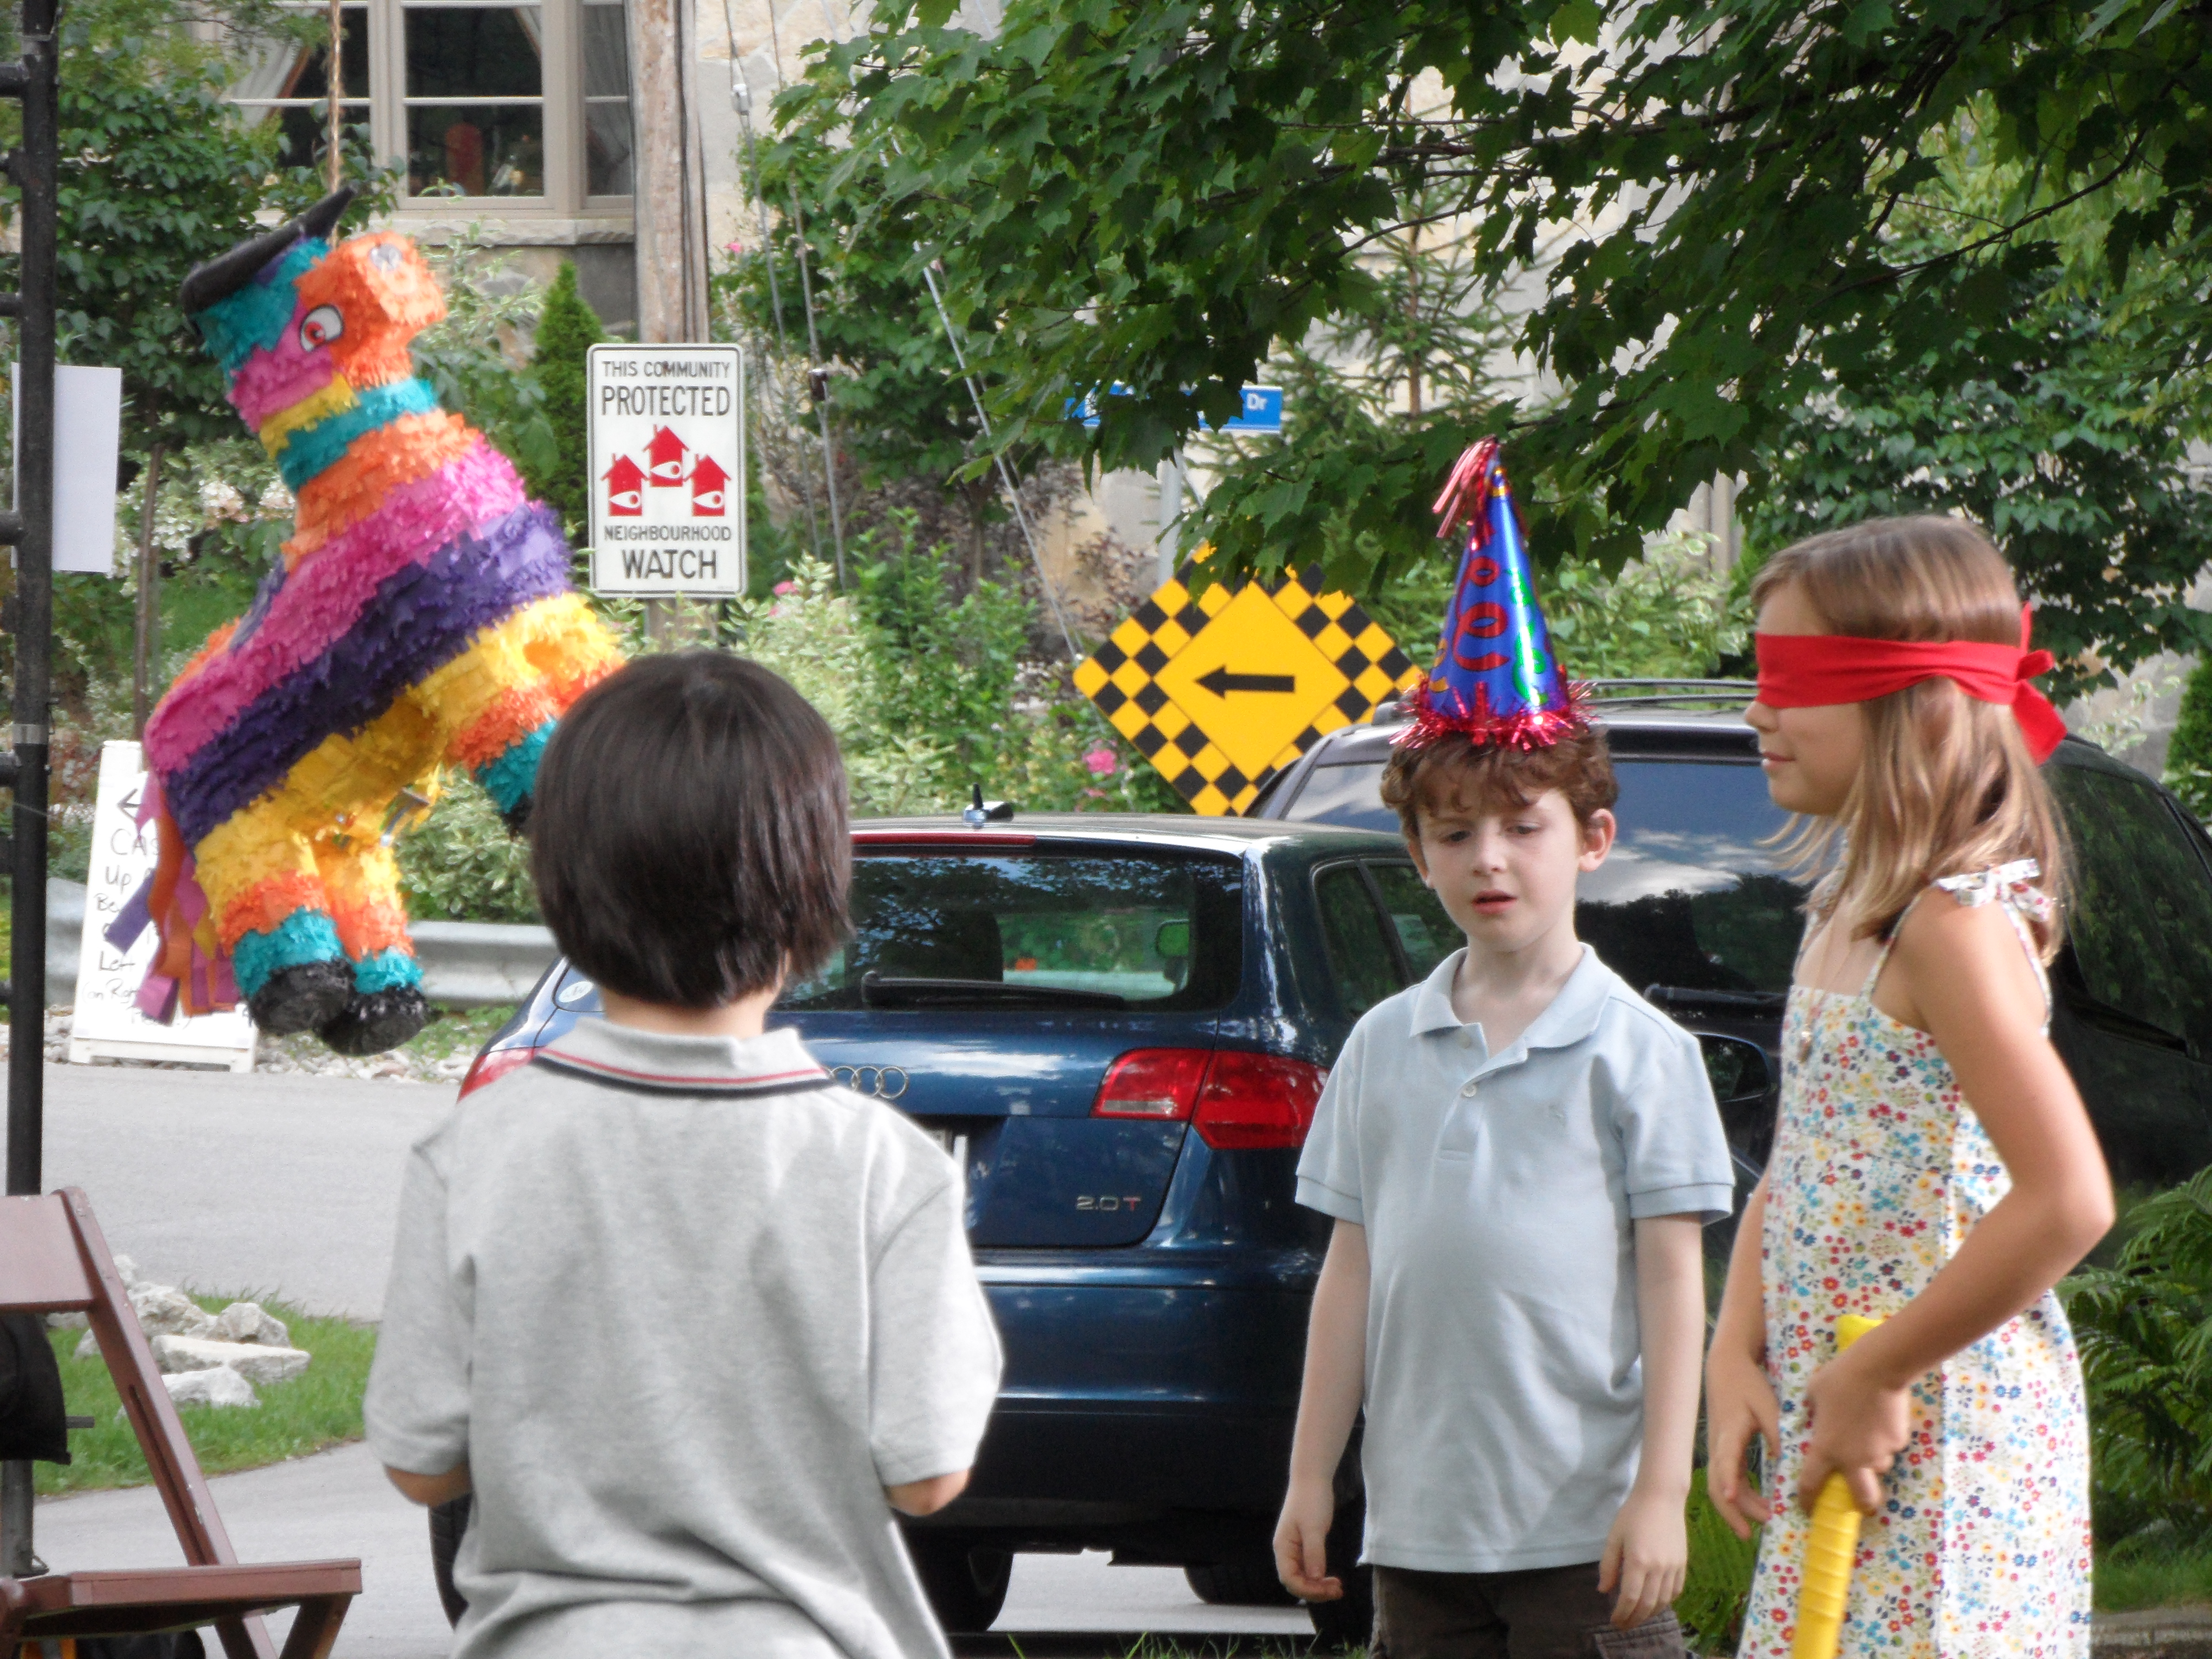 Manulife Financial (commercial - pinata) - on set July 2010.